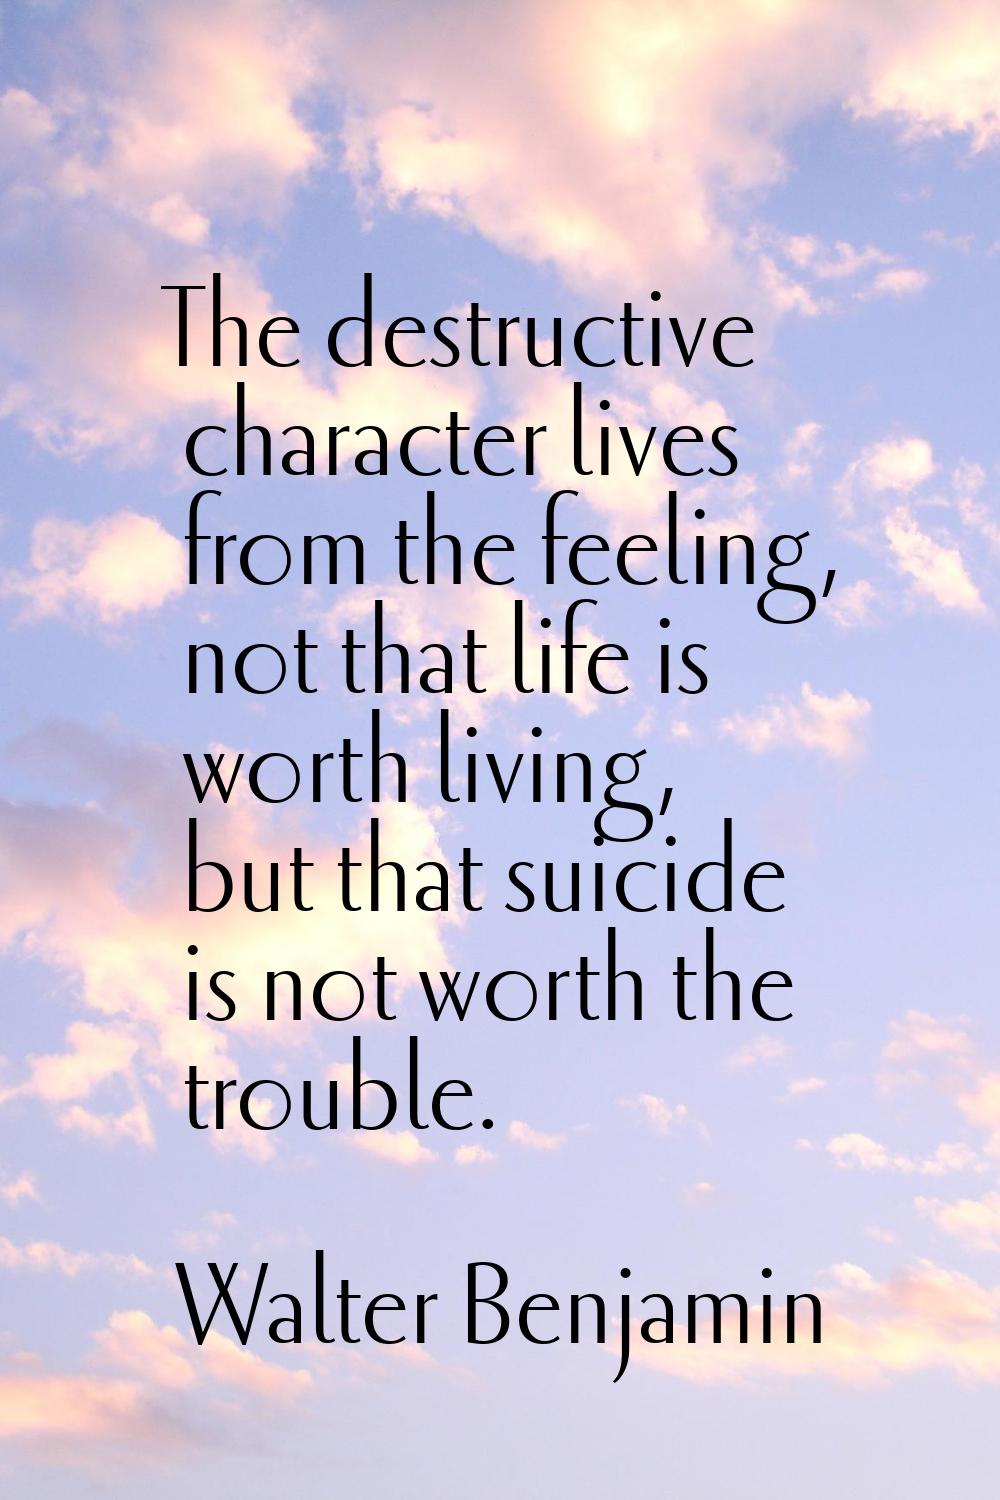 The destructive character lives from the feeling, not that life is worth living, but that suicide i